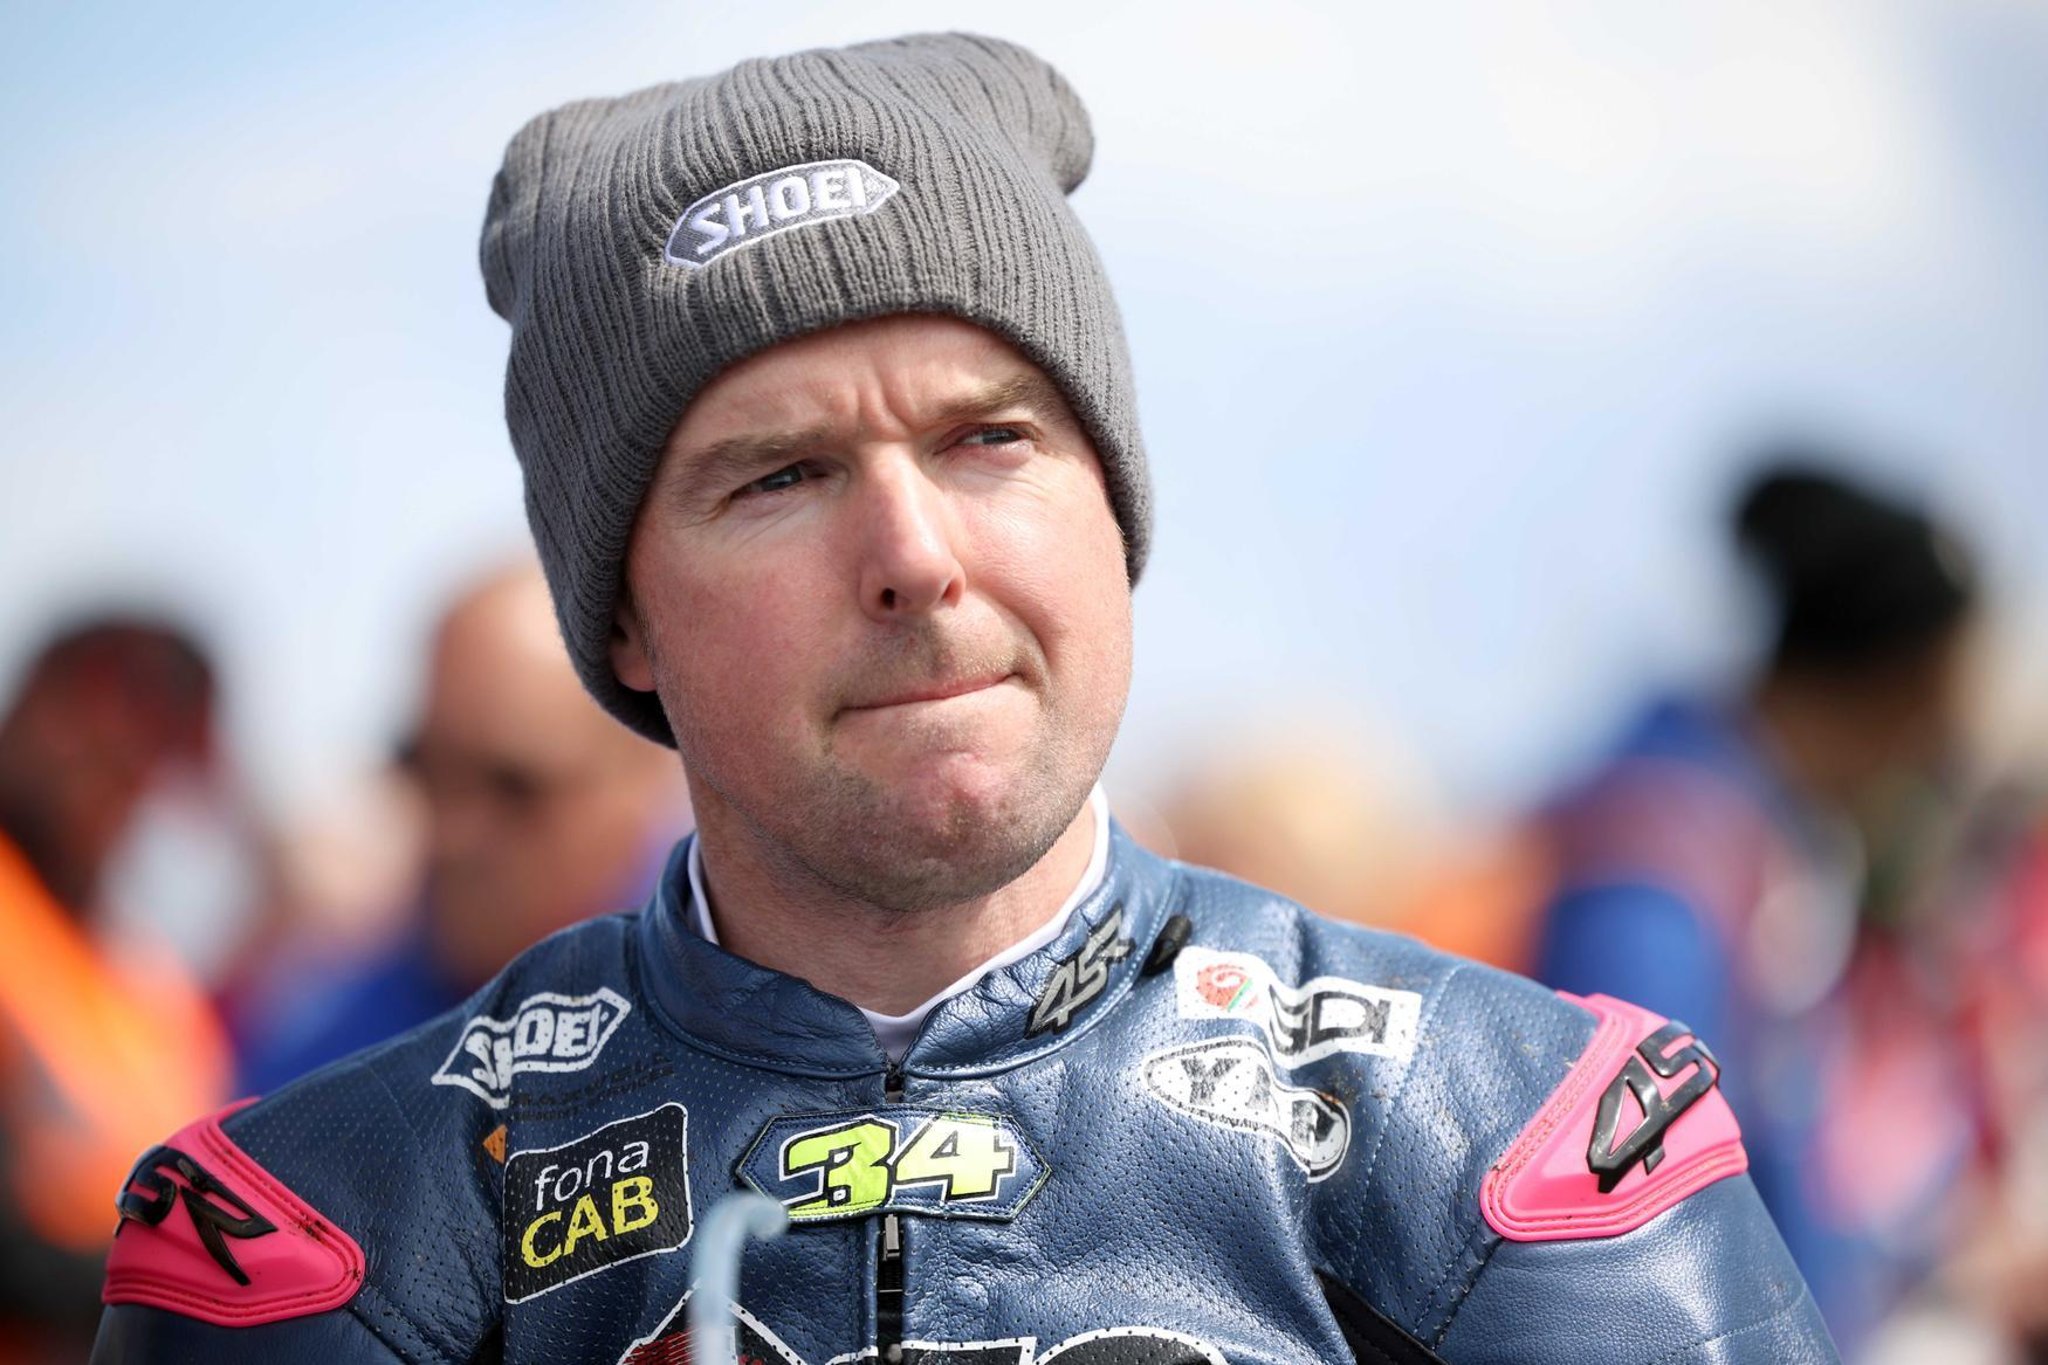 NW200: Alastair Seeley chasing milestone 25th victory as racing returns for first time since 2019